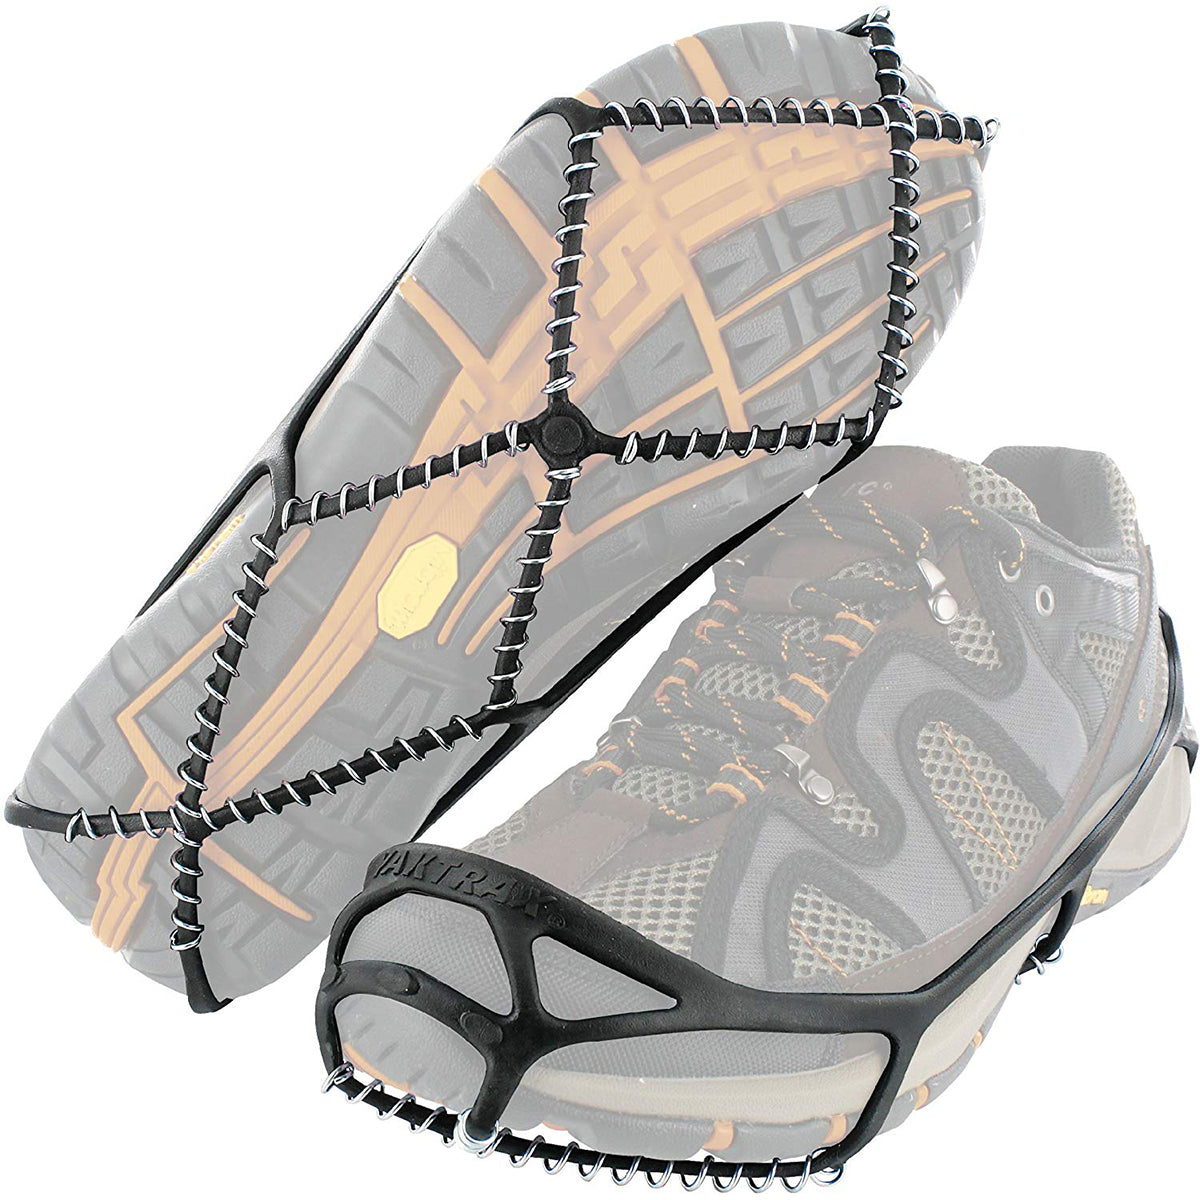 Yaktrax Walk Winter Traction Cleats for Snow and Ice Yaktrax